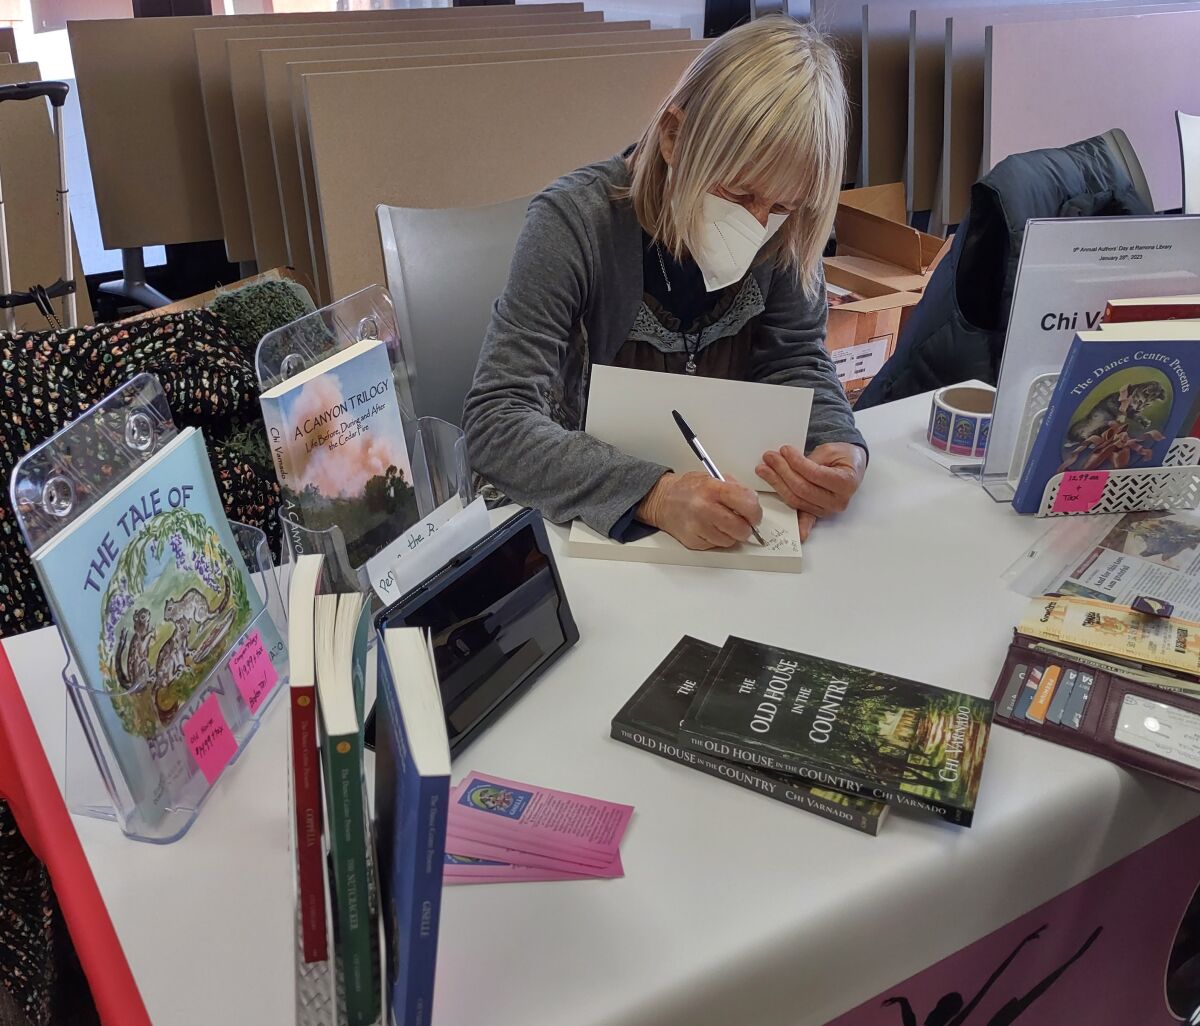 Ramona author Chi Varnado signs a copy of one of her books during Authors’ Day.